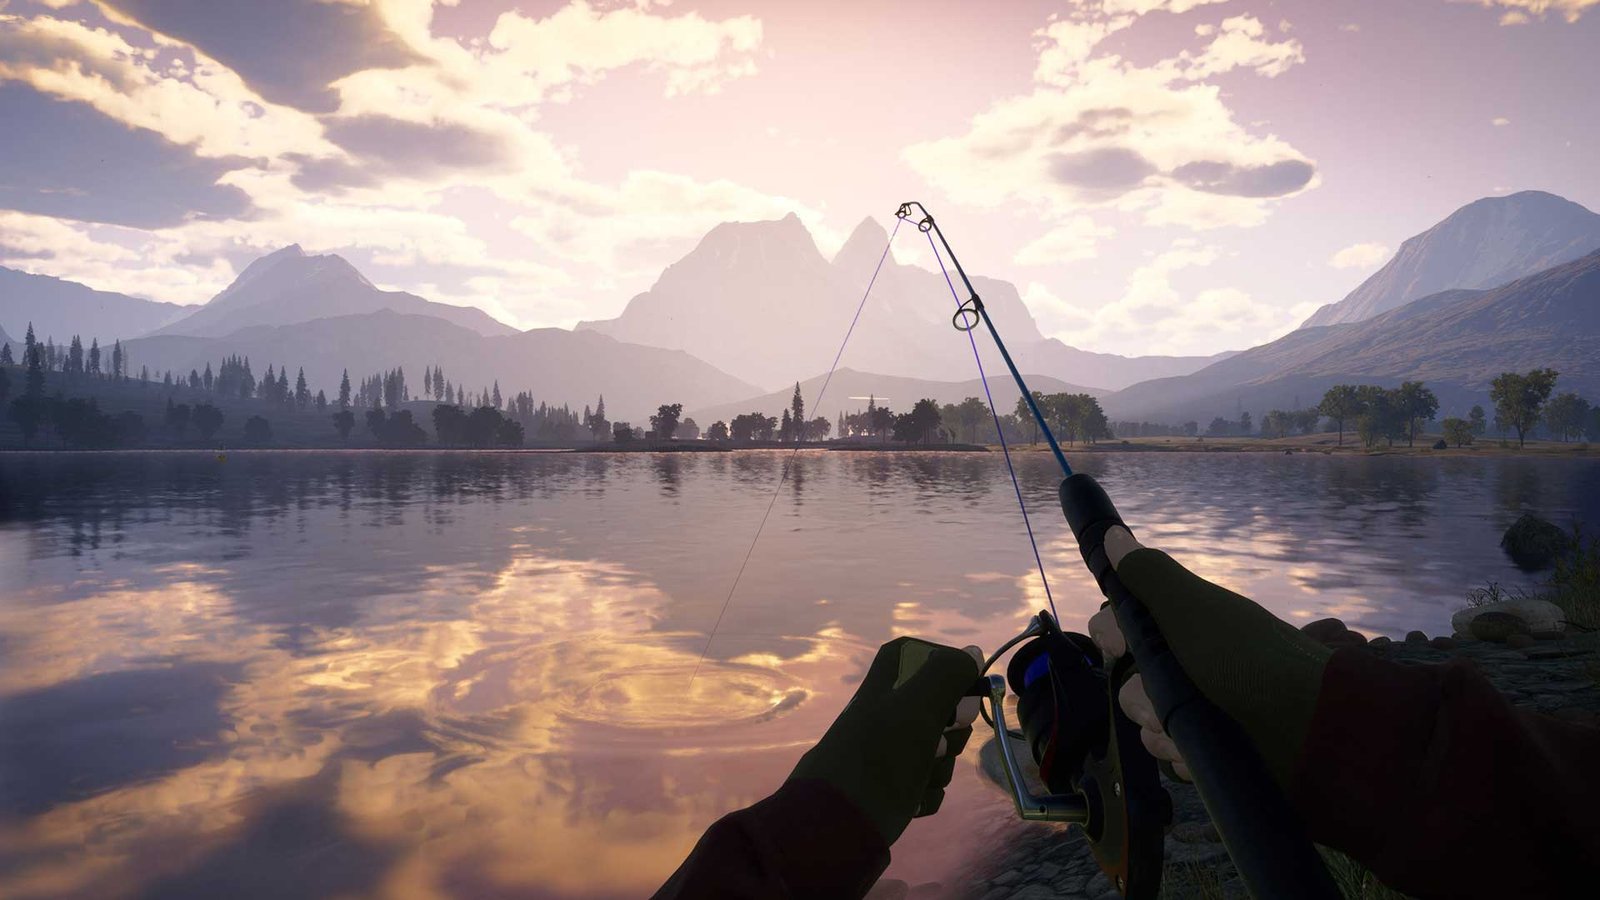 Call of the Wild: The Angler brings co-op fishing to PC first in August